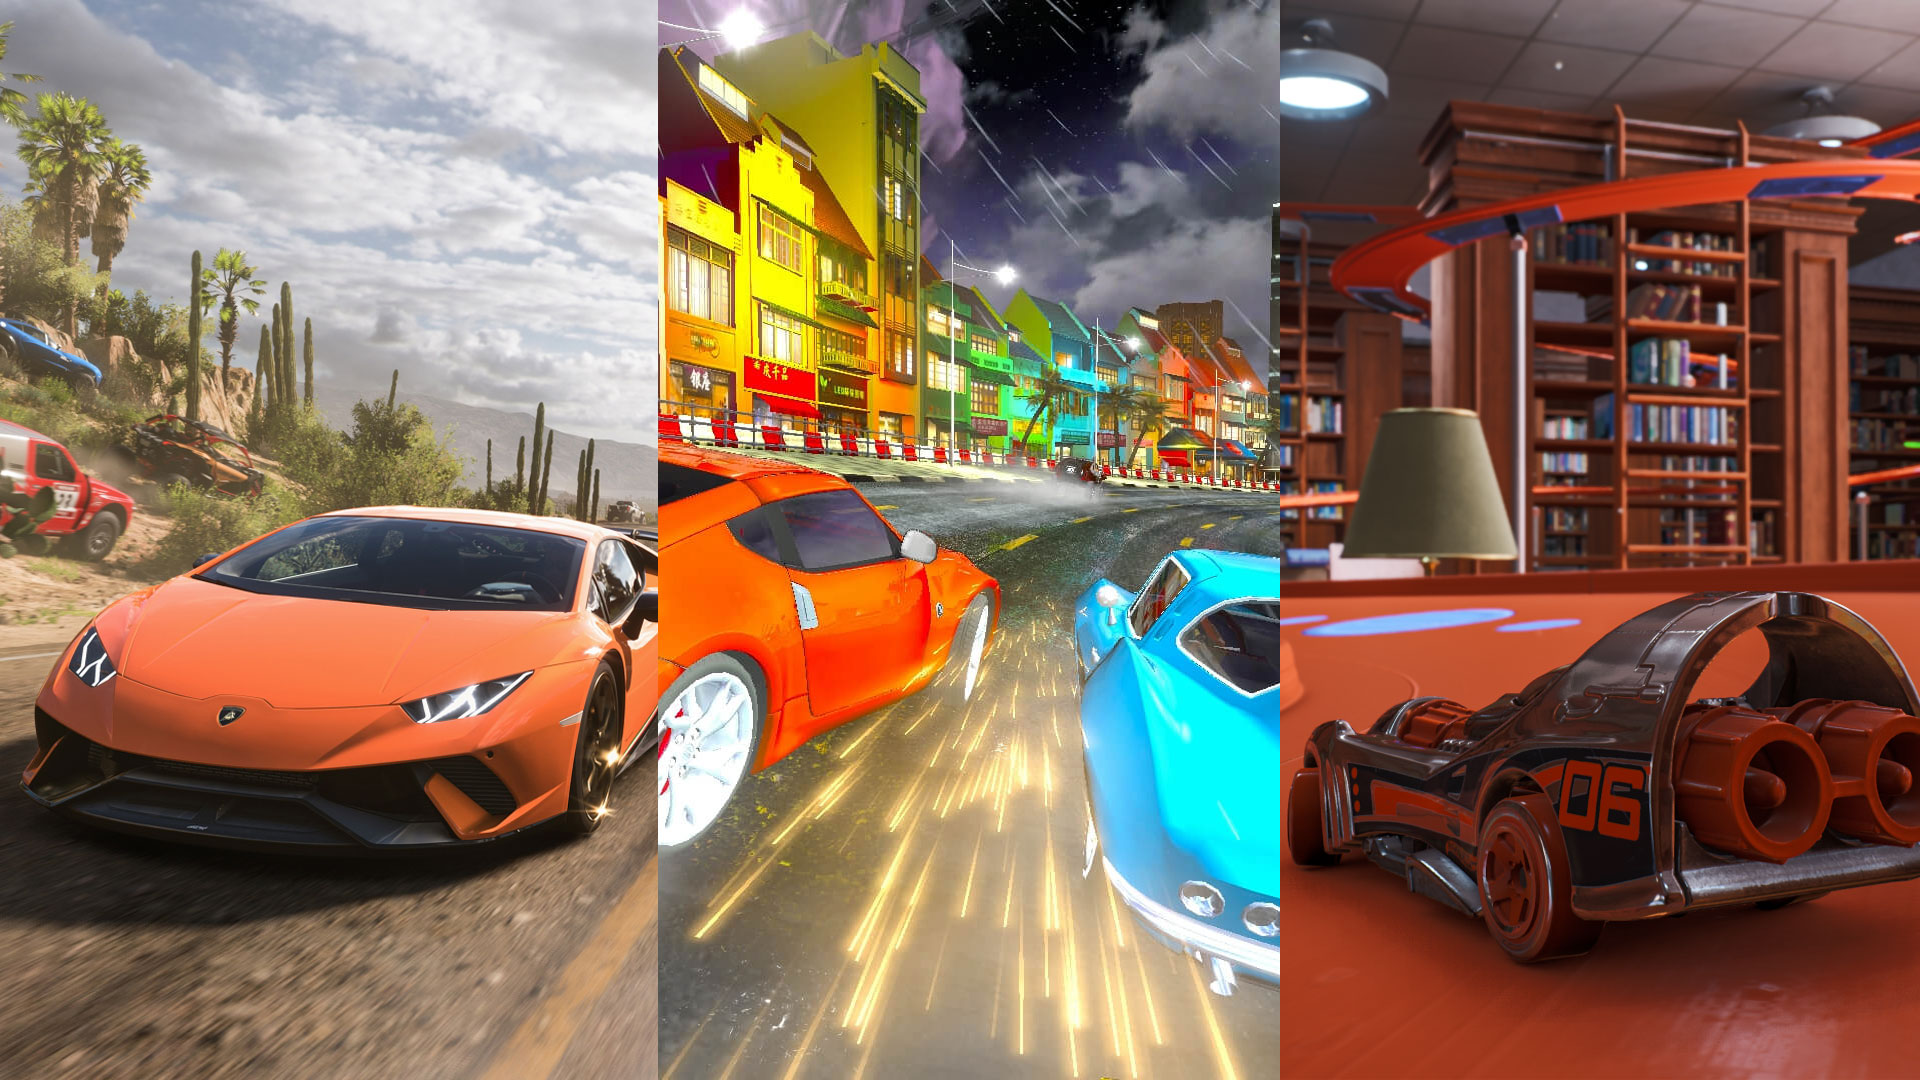 Project Cars :Car Racing Games,Car Driving Games Game for Android